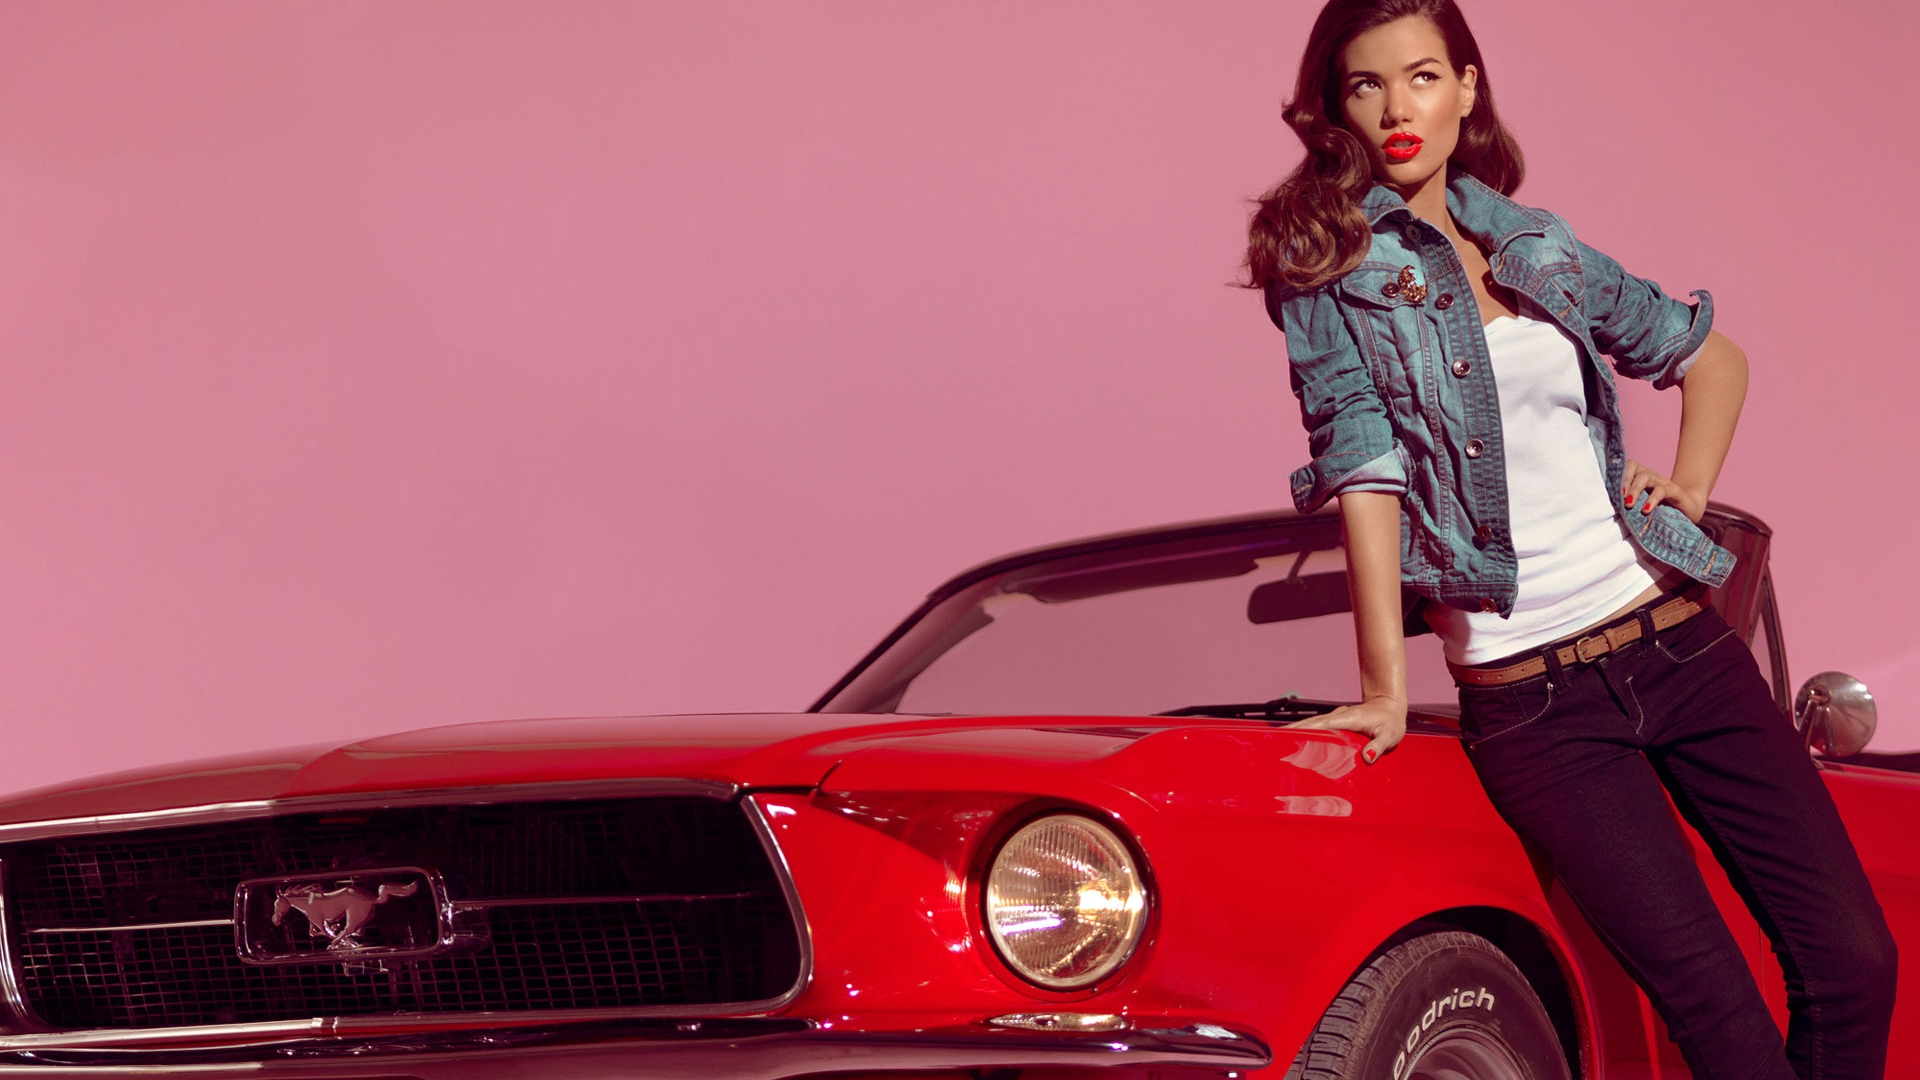 Ford Mustang displayed in front of a group of women, creating an alluring and empowering atmosphere.